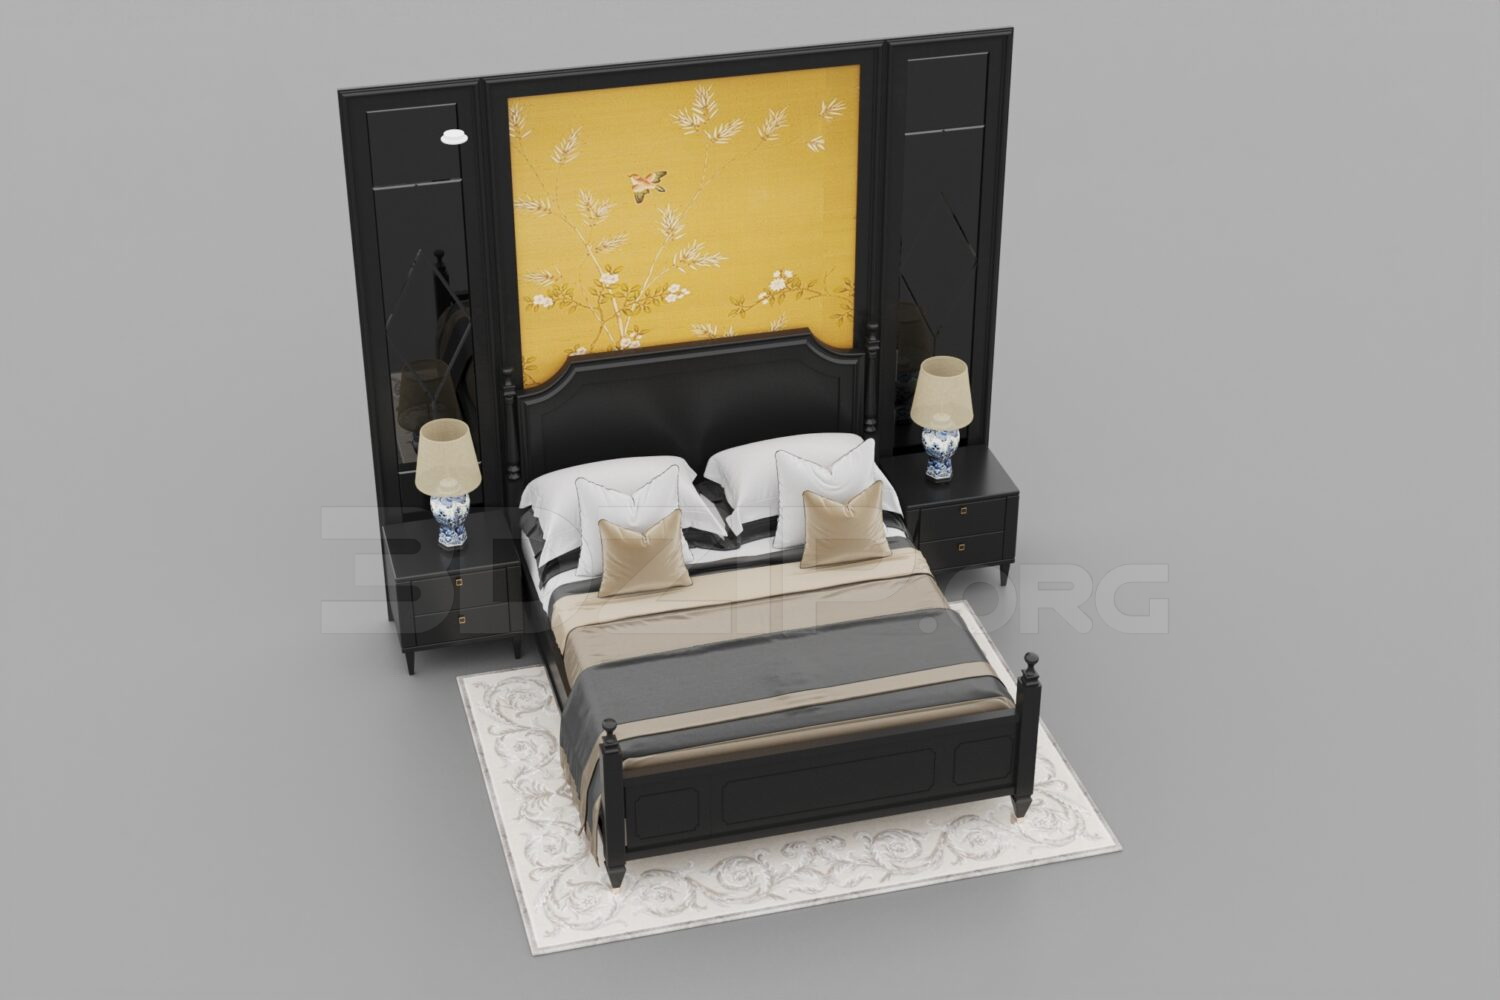 1910. Download Free Bed Model By Phan Dai Duong